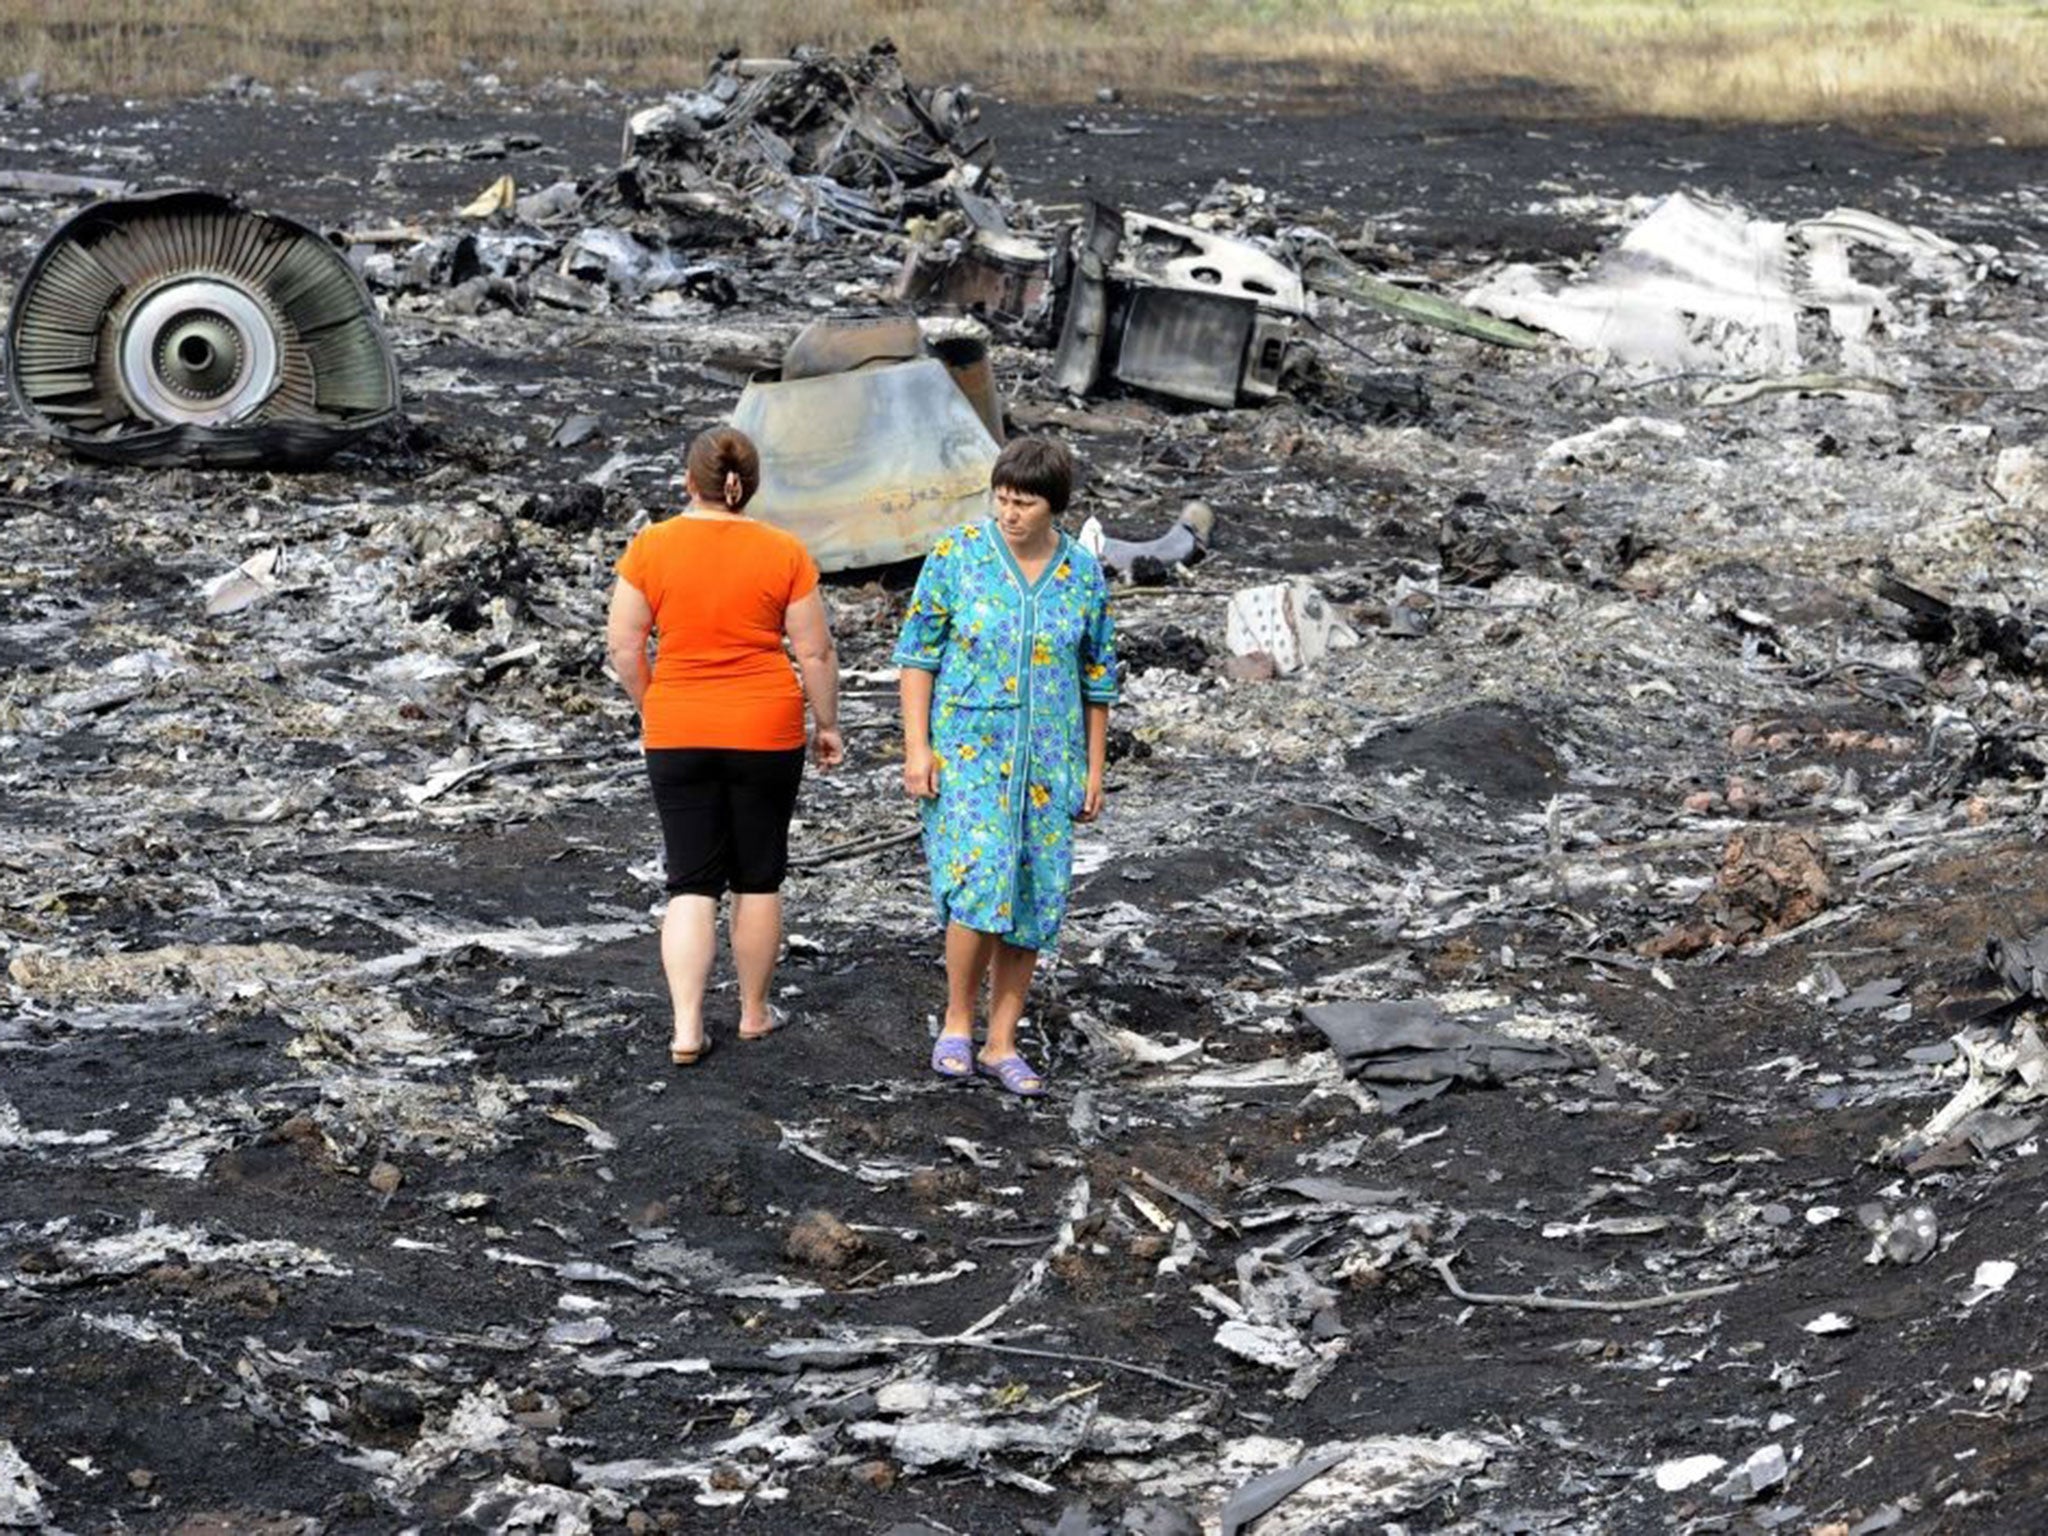 Malaysia Airlines MH17 crash Vital clues may have been moved, say air crash experts The Independent The Independent